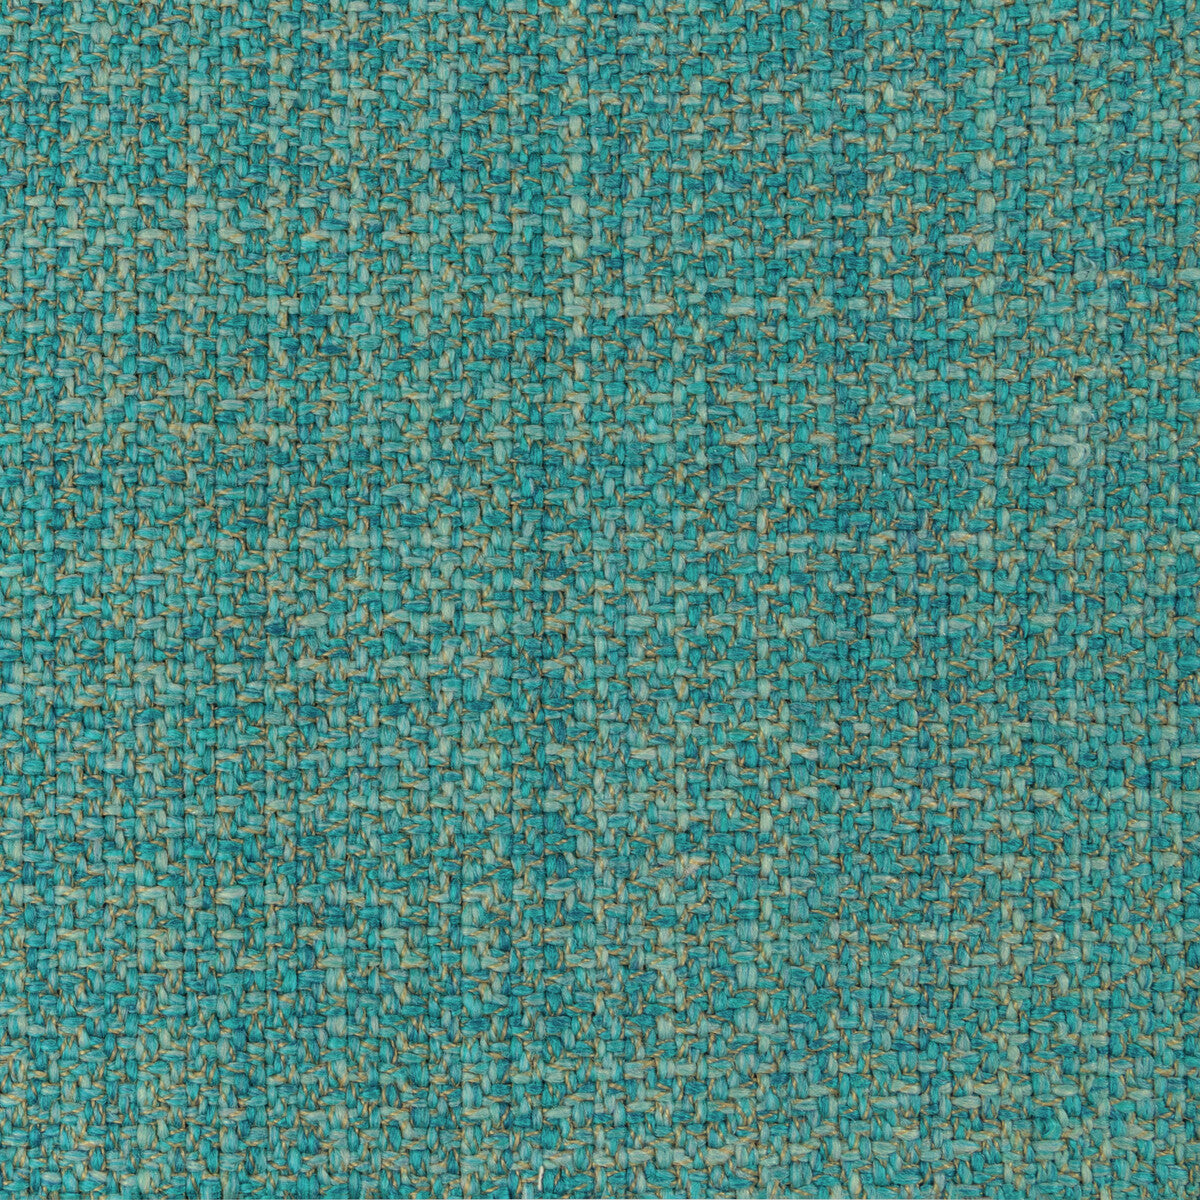 Revel Texture fabric in teal color - pattern 8020138.13.0 - by Brunschwig &amp; Fils in the En Vacances II collection